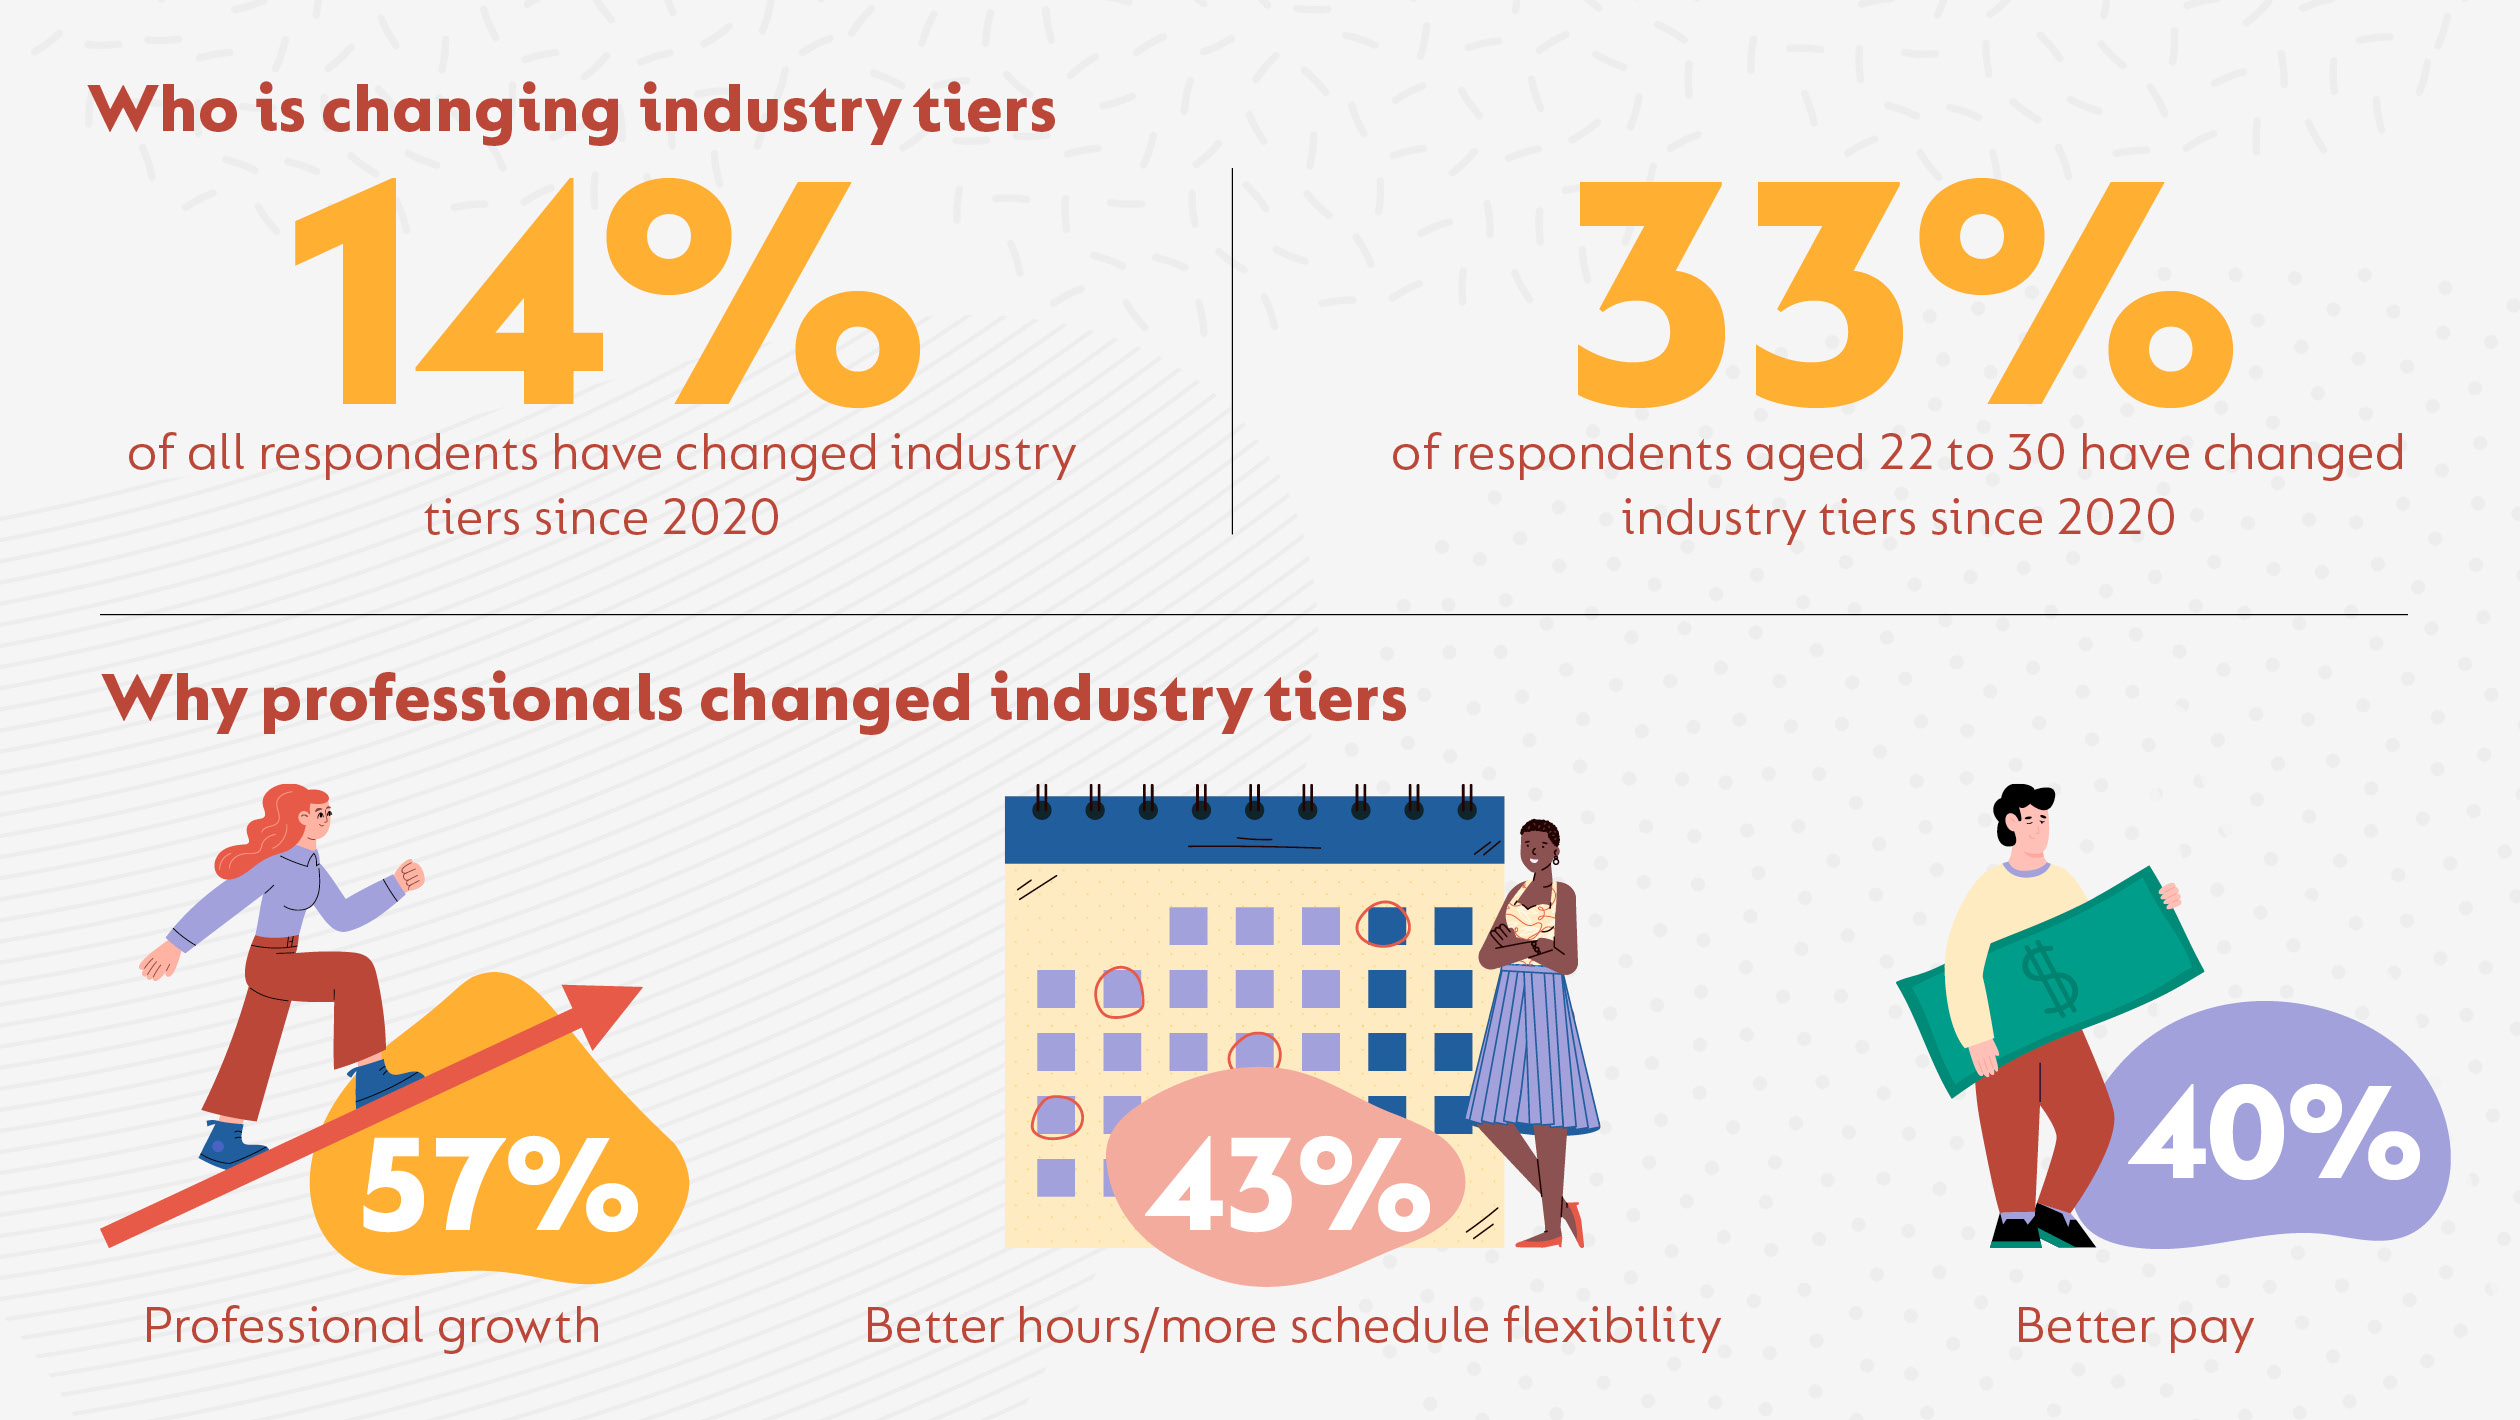 Infographic showing that professionals have been changing industry tiers since 2020